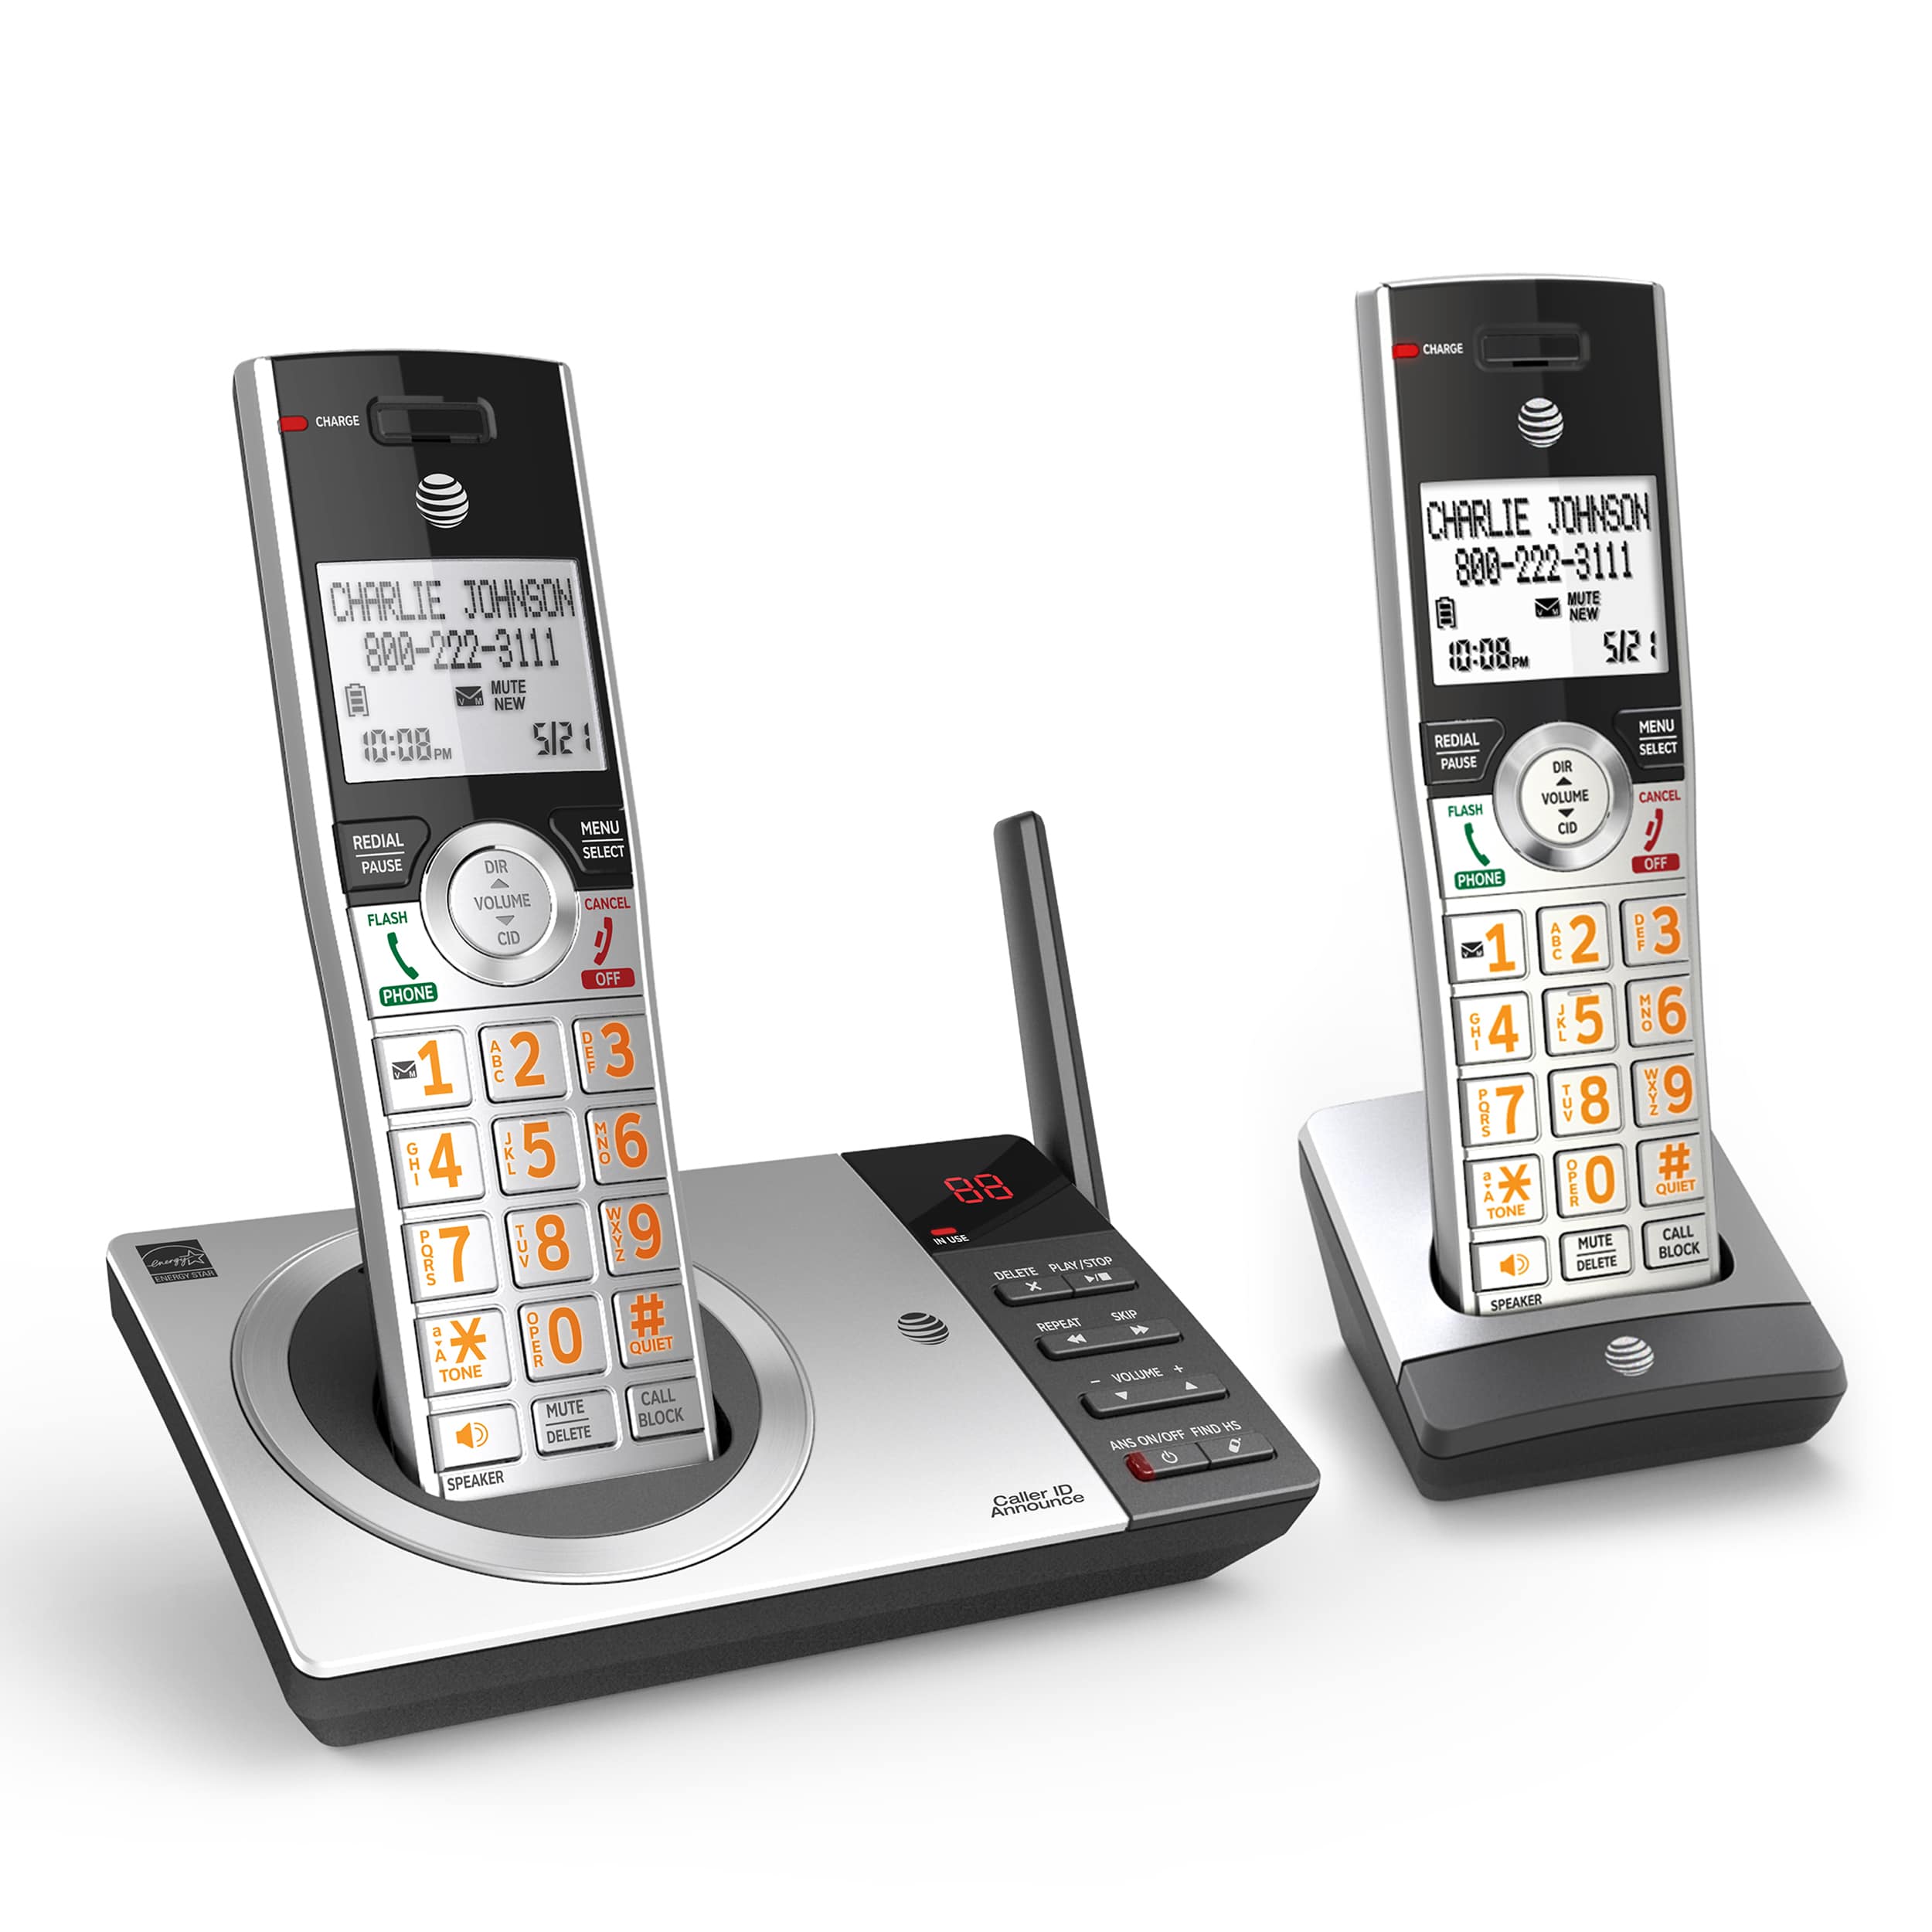 2 handset cordless answering system with smart call blocker - view 3